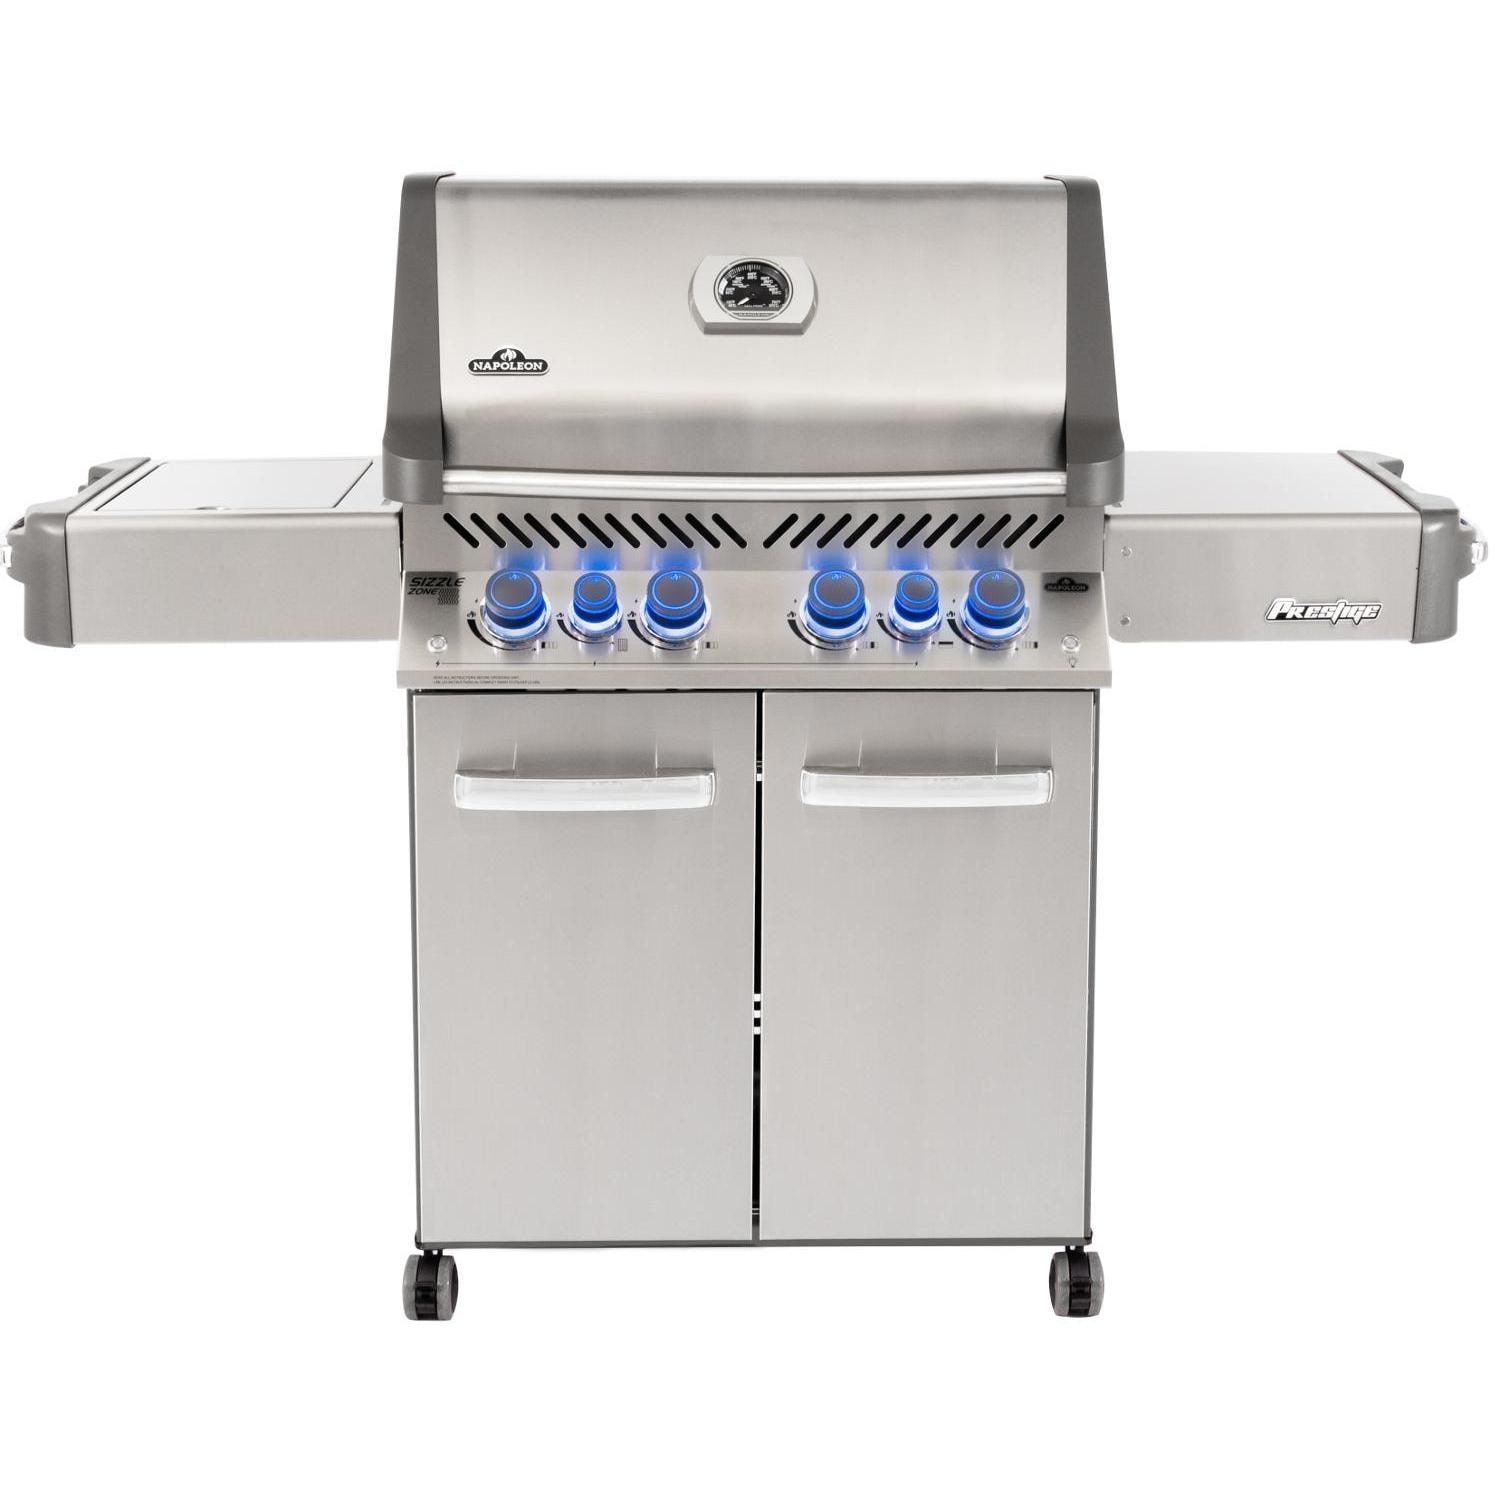 Napoleon Prestige 500 Propane Gas Grill With Infrared Rear Burner And Infrared Side Burner - image 1 of 6